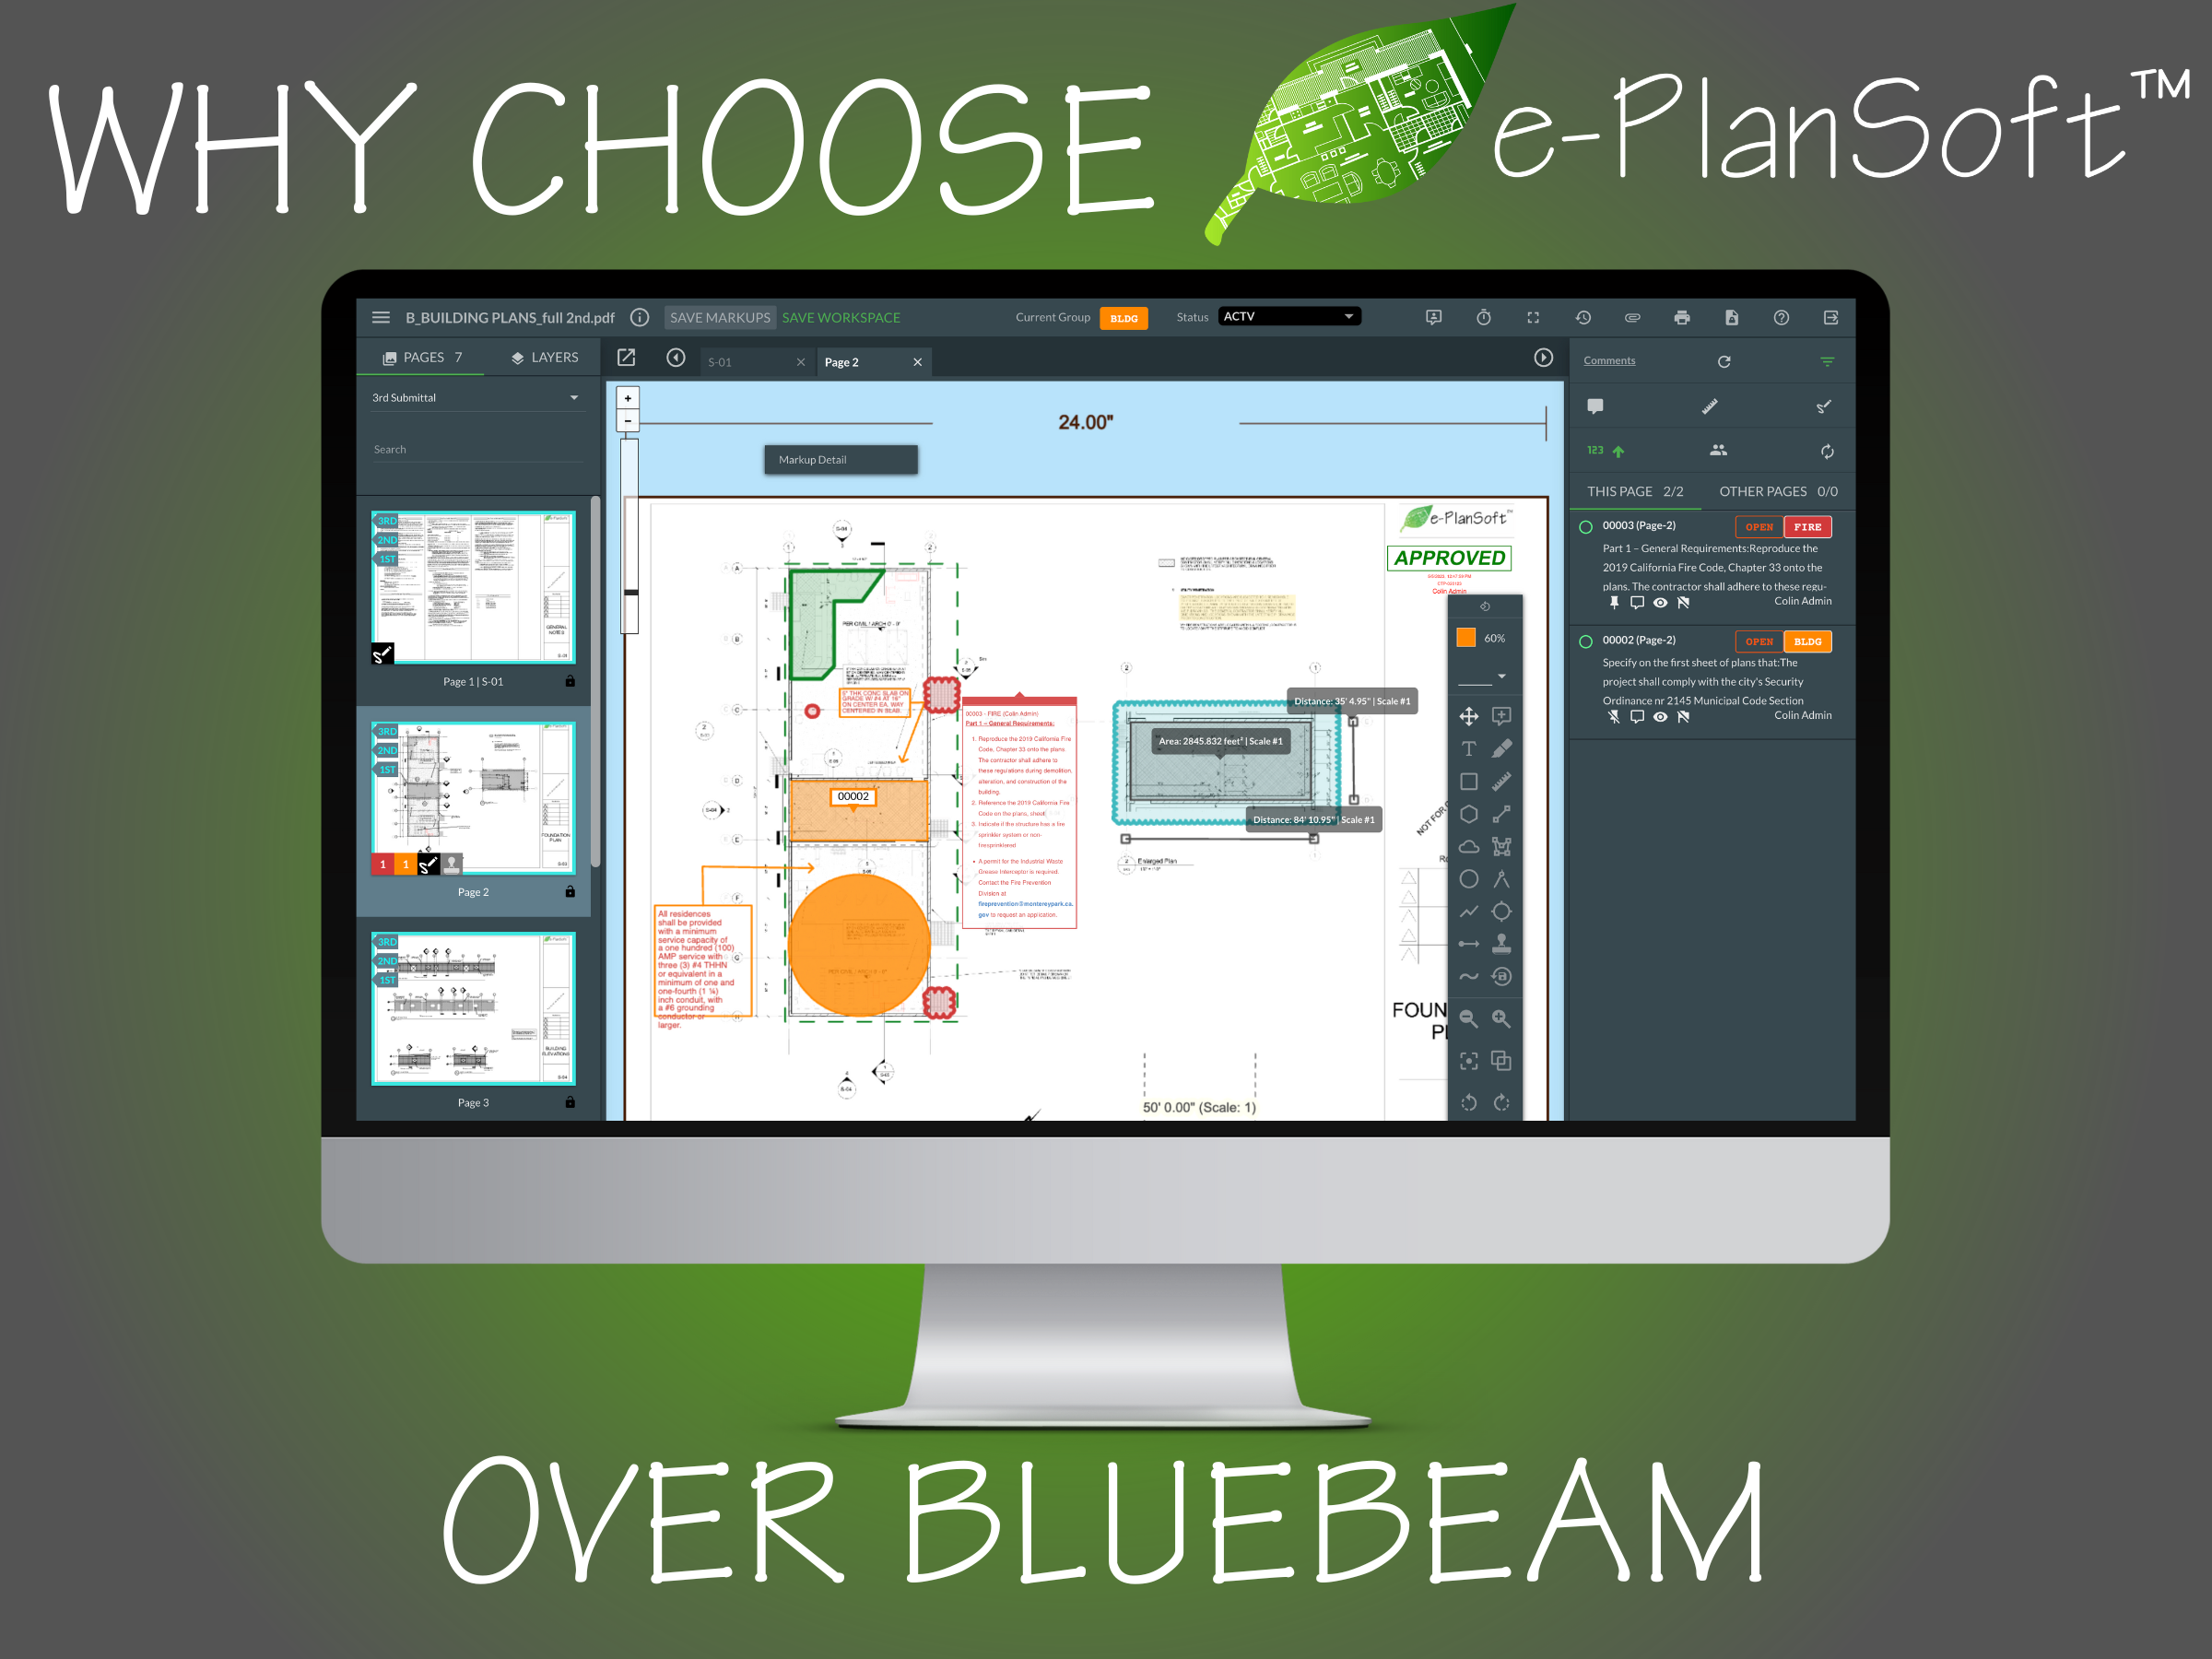 Why should you choose e-PlanSoft™ over Bluebeam for plan reviews?